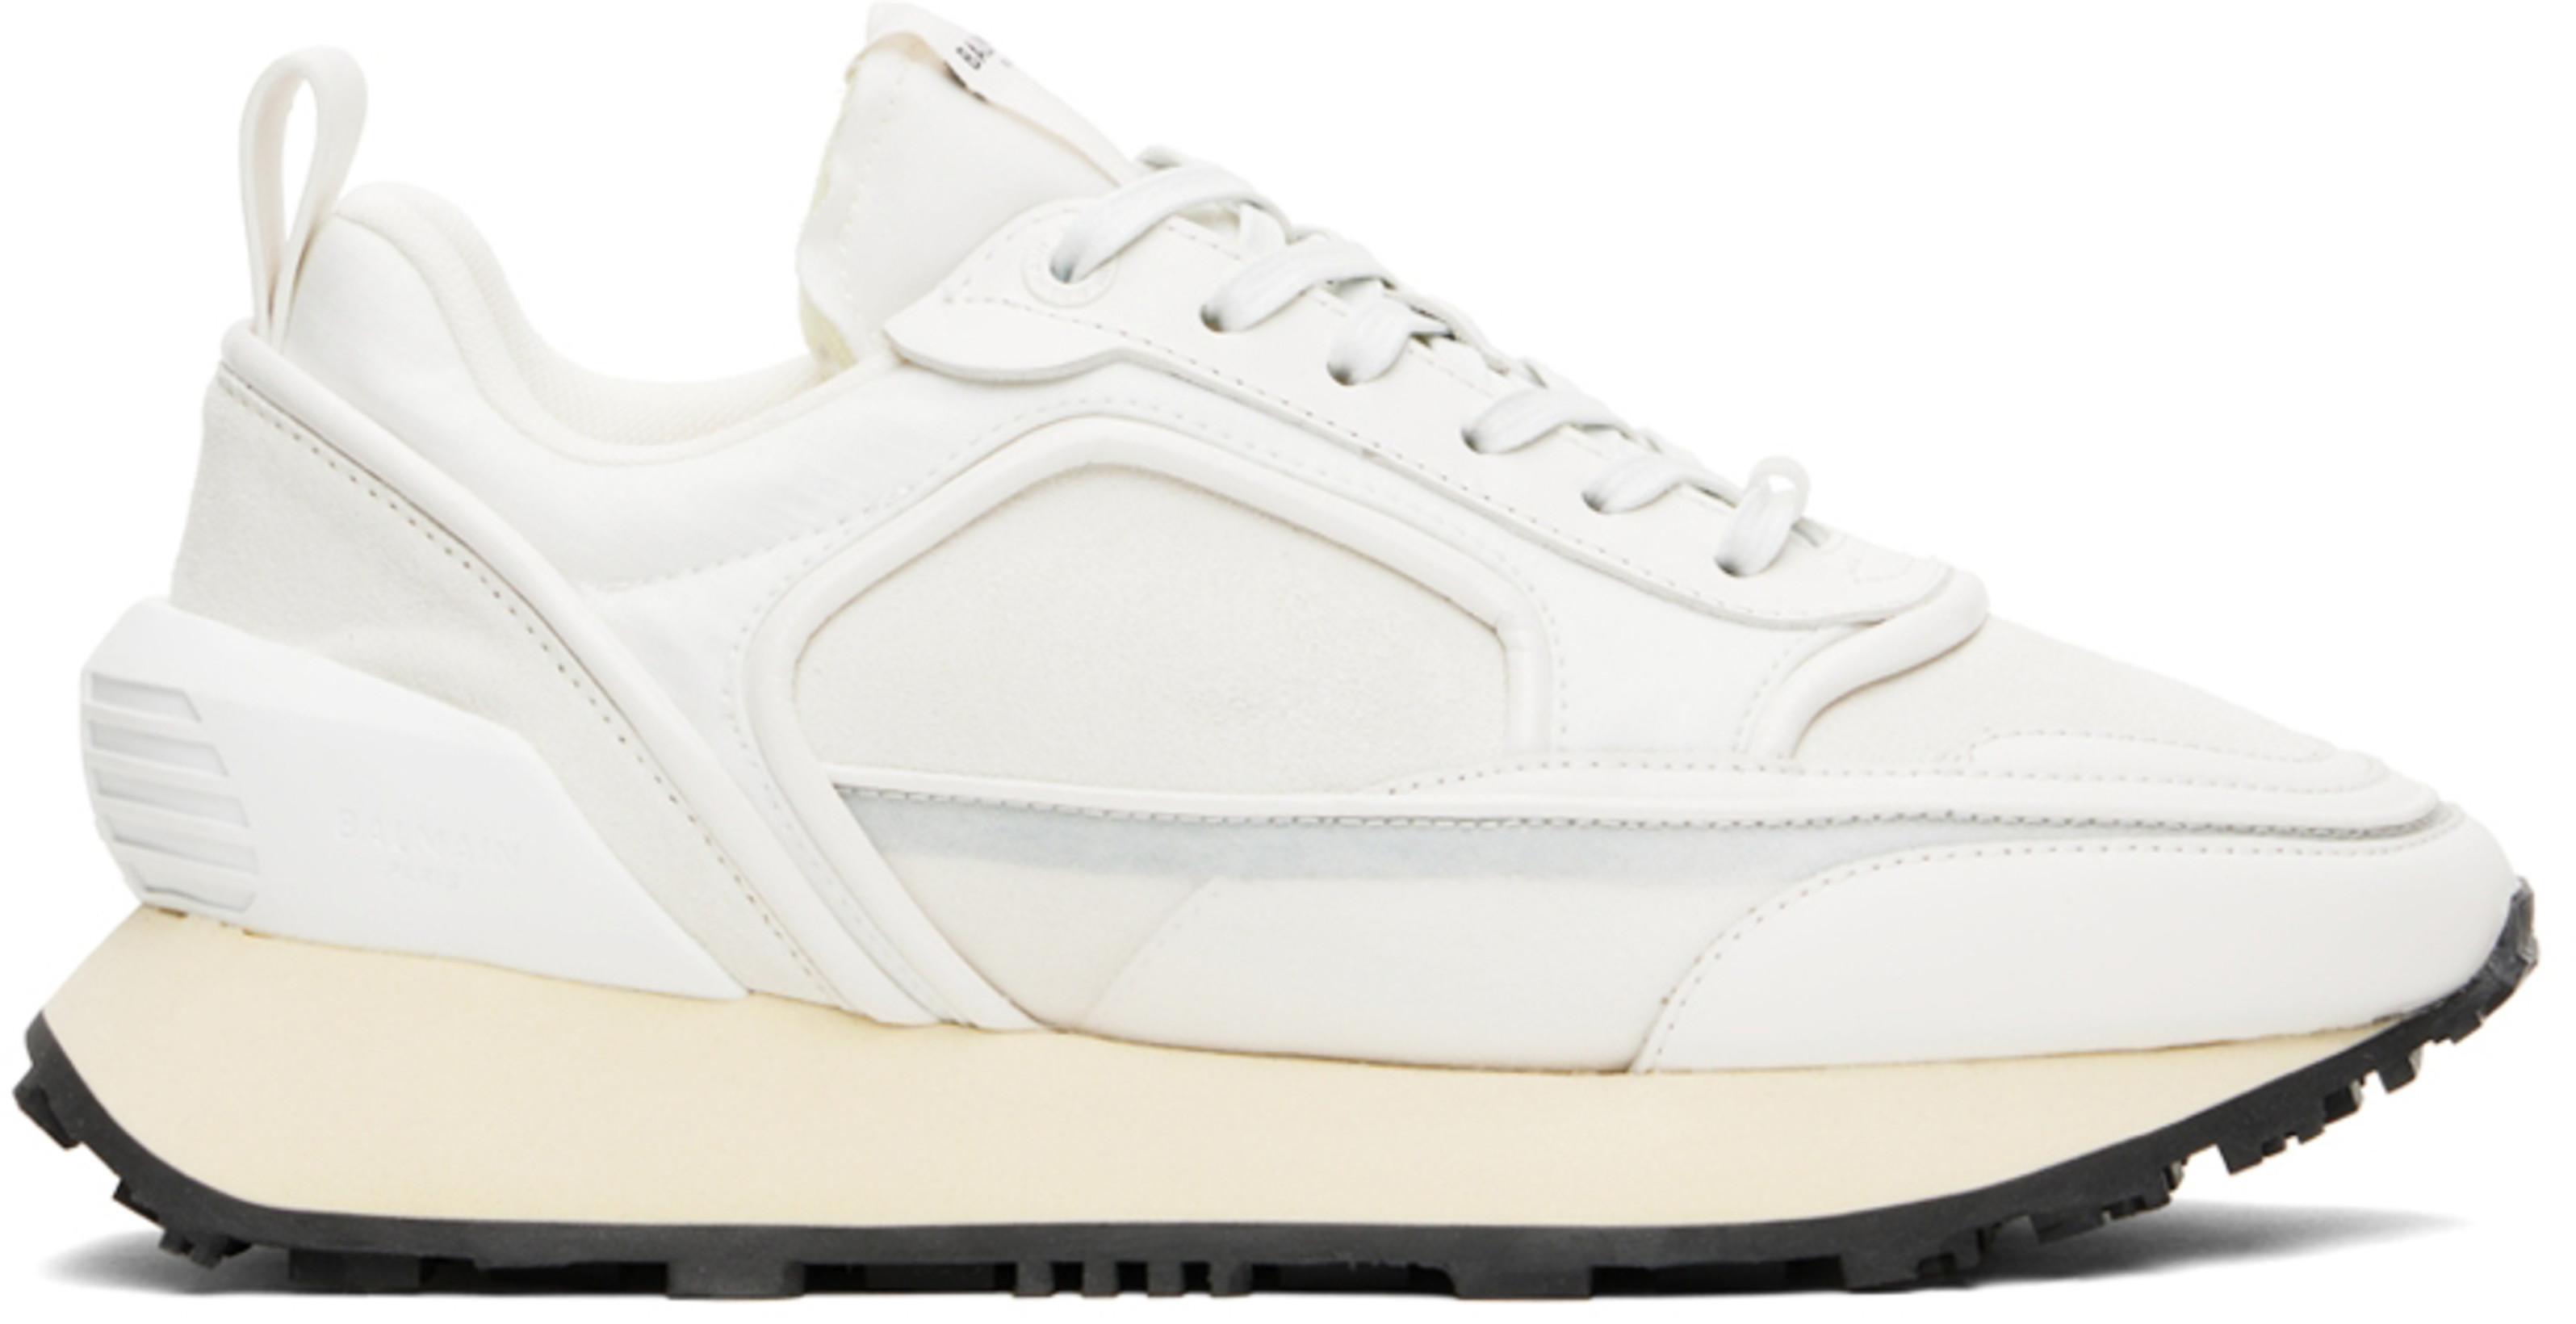 Off-White Racer Sneakers by BALMAIN